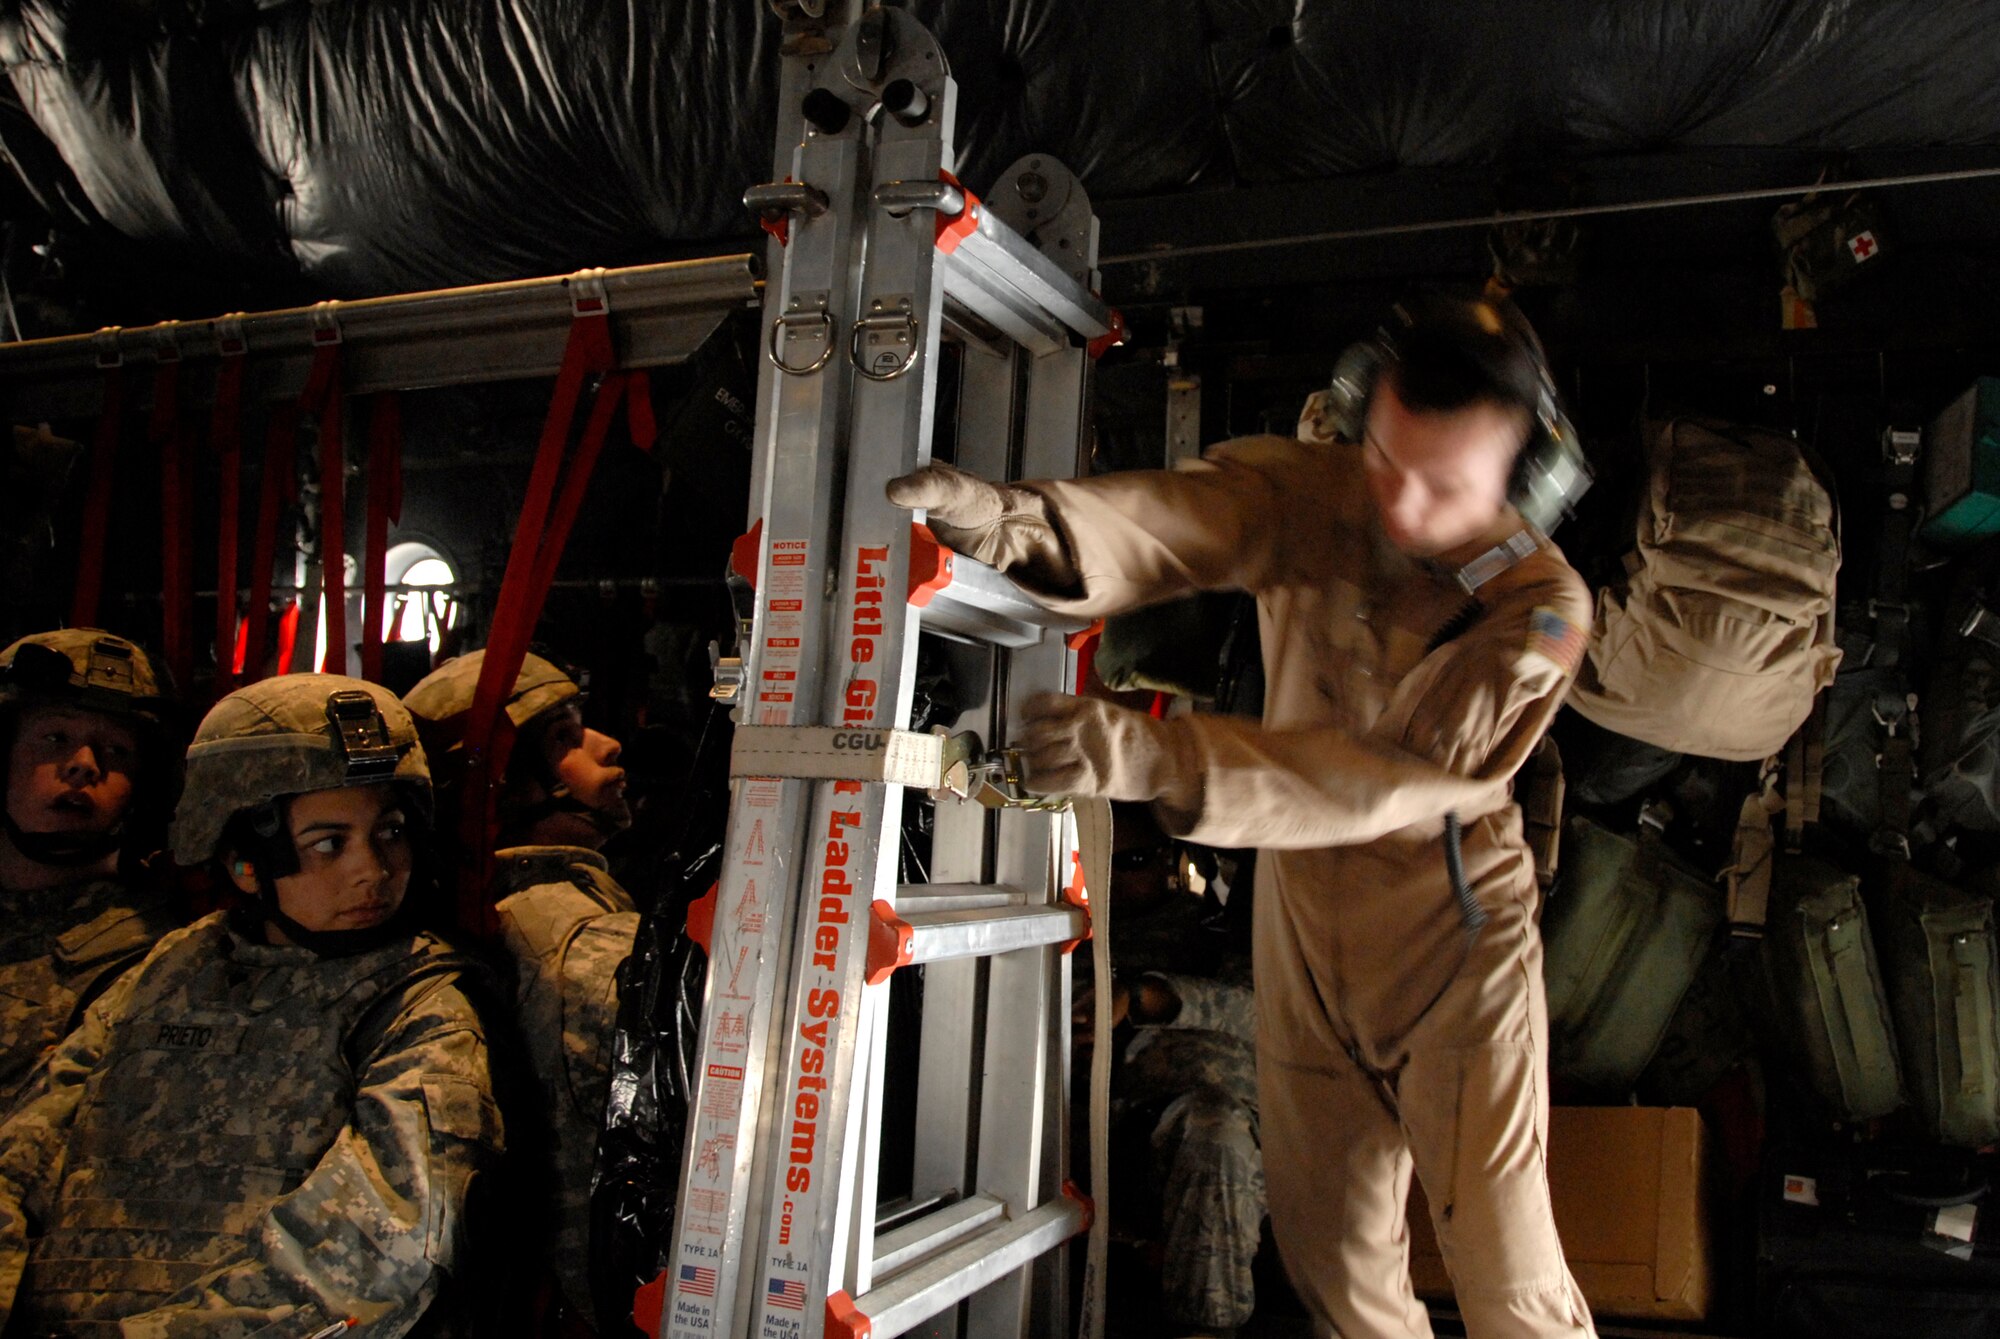 SOUTHWEST ASIA -- Senior Airman Zachary Kelhi, a C-130 Hercules loadmaster deployed to the 737th Expeditionary Airlift Squadron, secures a ladder to the aircraft in preparation for the take-off of a combat sortie that transported Soldiers into Iraq April 21, 2008, from an air base in the Persian Gulf Region. The Air Force recently surpassed more than one million sorties flown by Air Force aircraft in the Global War on Terror since Sept. 11, 2001. Synchronized and integrated into larger coalition air efforts, these missions represent the most deliberate, disciplined and precise air campaign in history. Airman Kelhi is deployed from the 39th Airlift Squadron, Dyess Air Force Base, Texas. (U.S. Air Force photo/ Staff Sgt. Patrick Dixon)